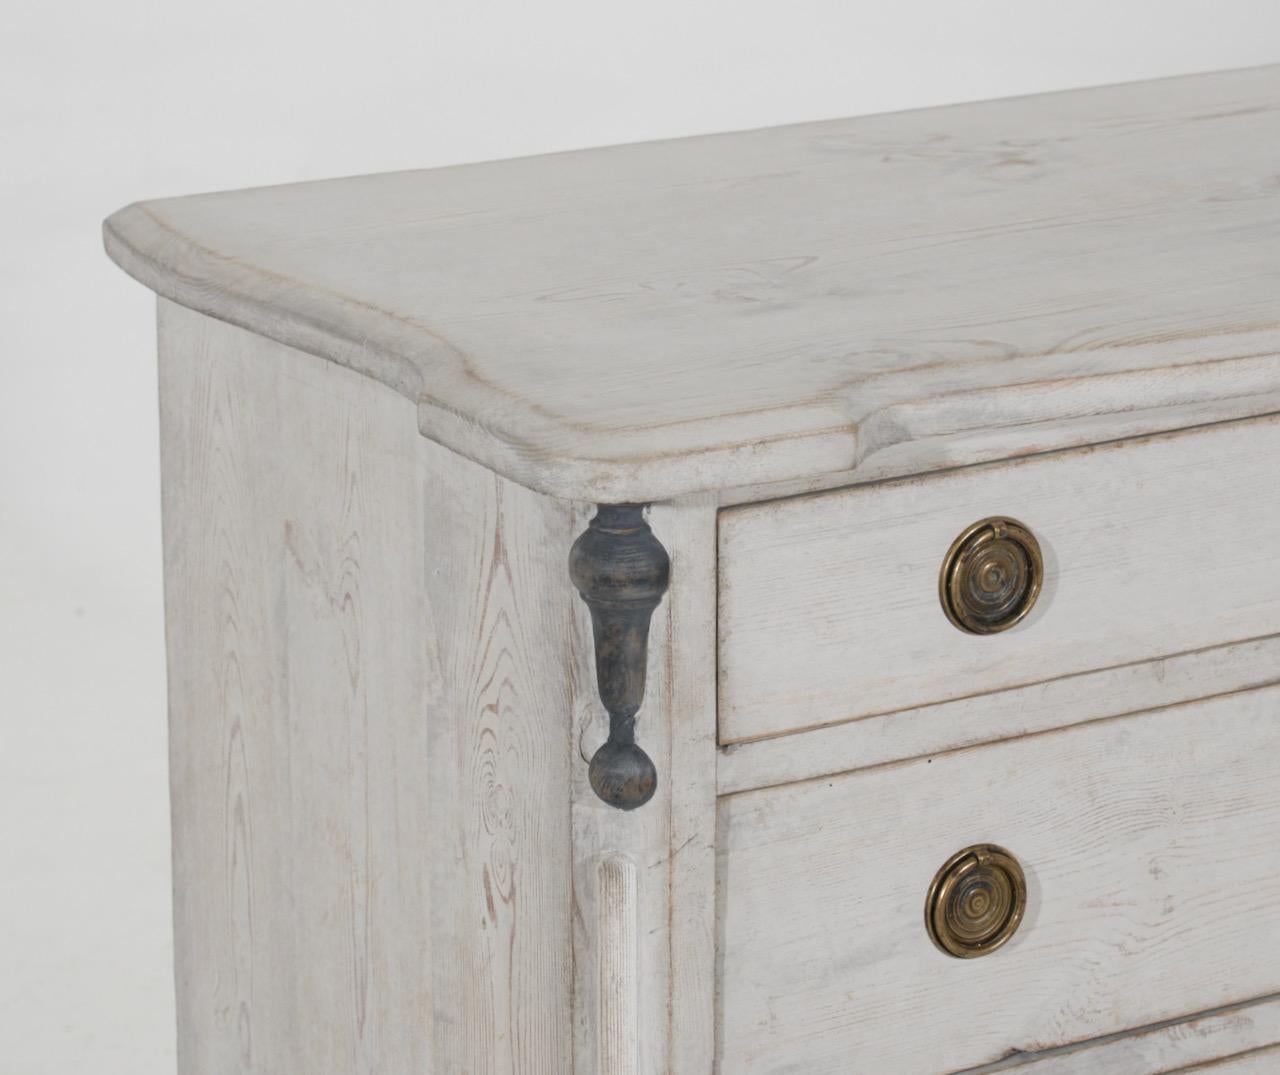 Unusual four drawer chest from Sweden with painted columns, 19th Century.